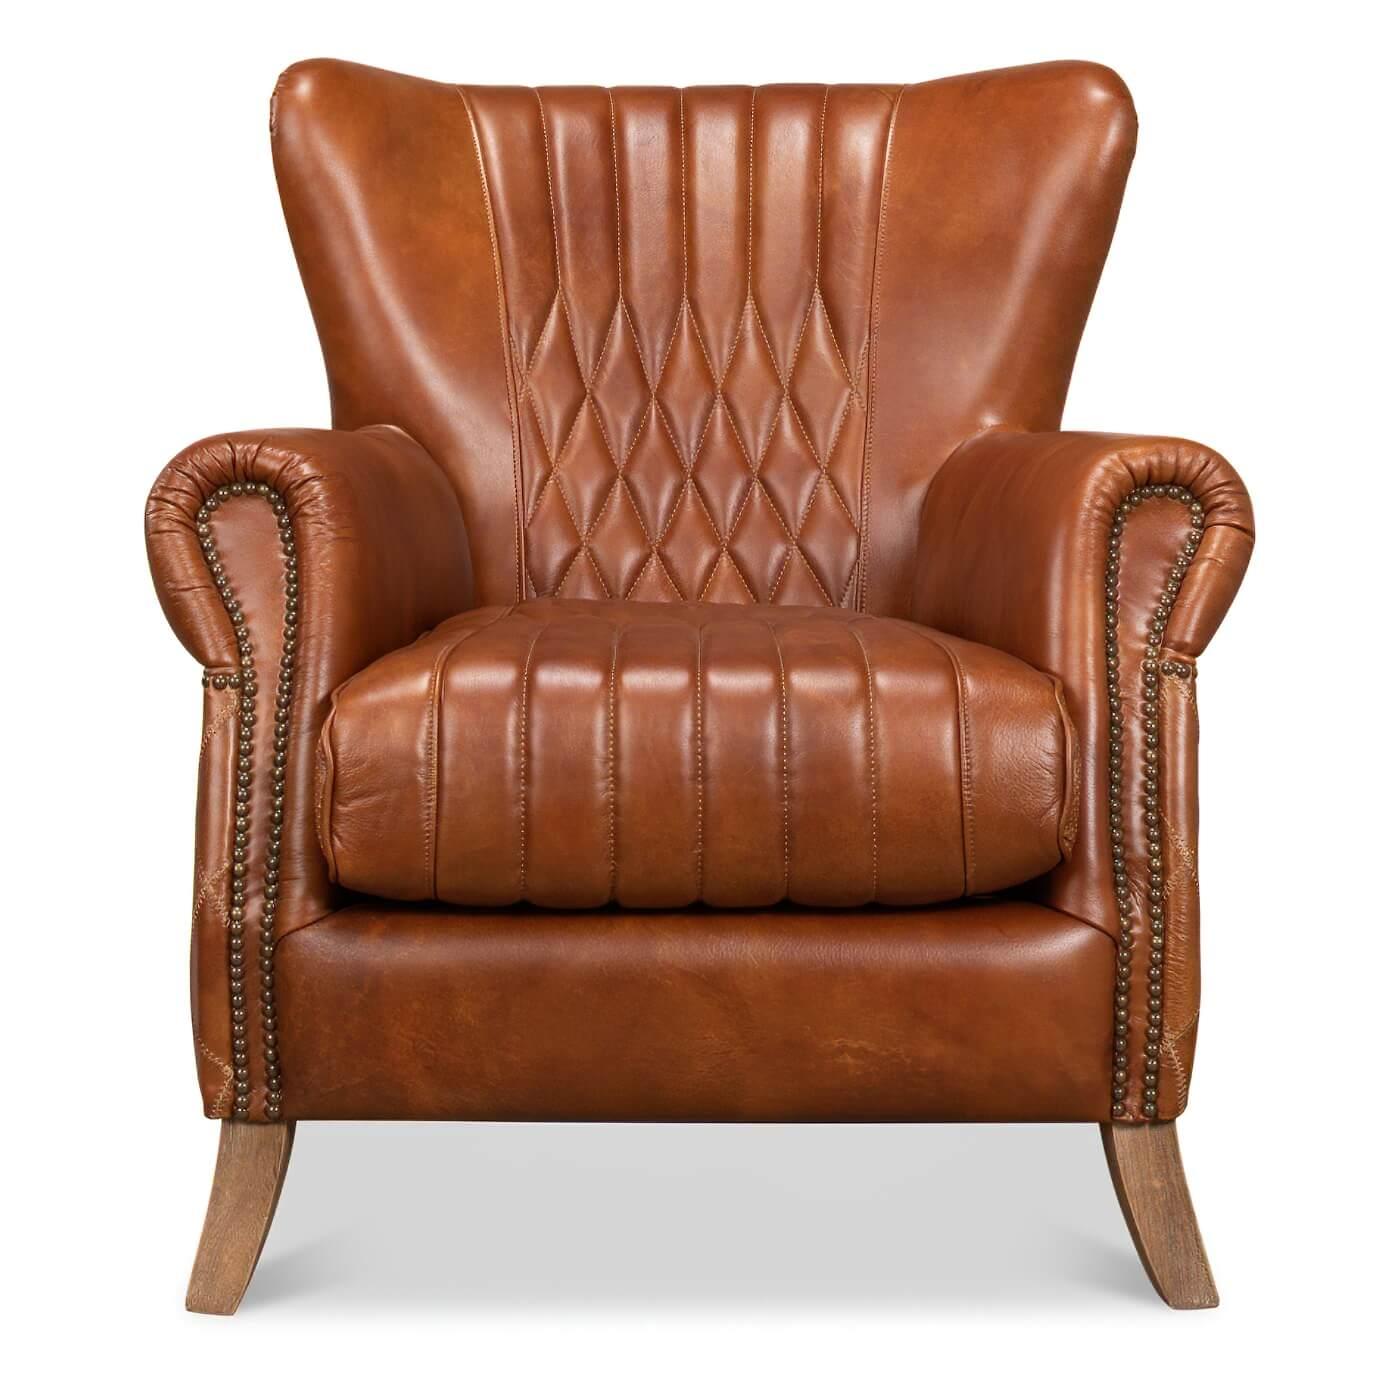 A classic quilted leather armchair with nailhead trim accents. This classic chair is upholstered in our Cuba brown leather and features a quilted design on its interior and exterior back and sides. It has rolled arms and a slightly curved back